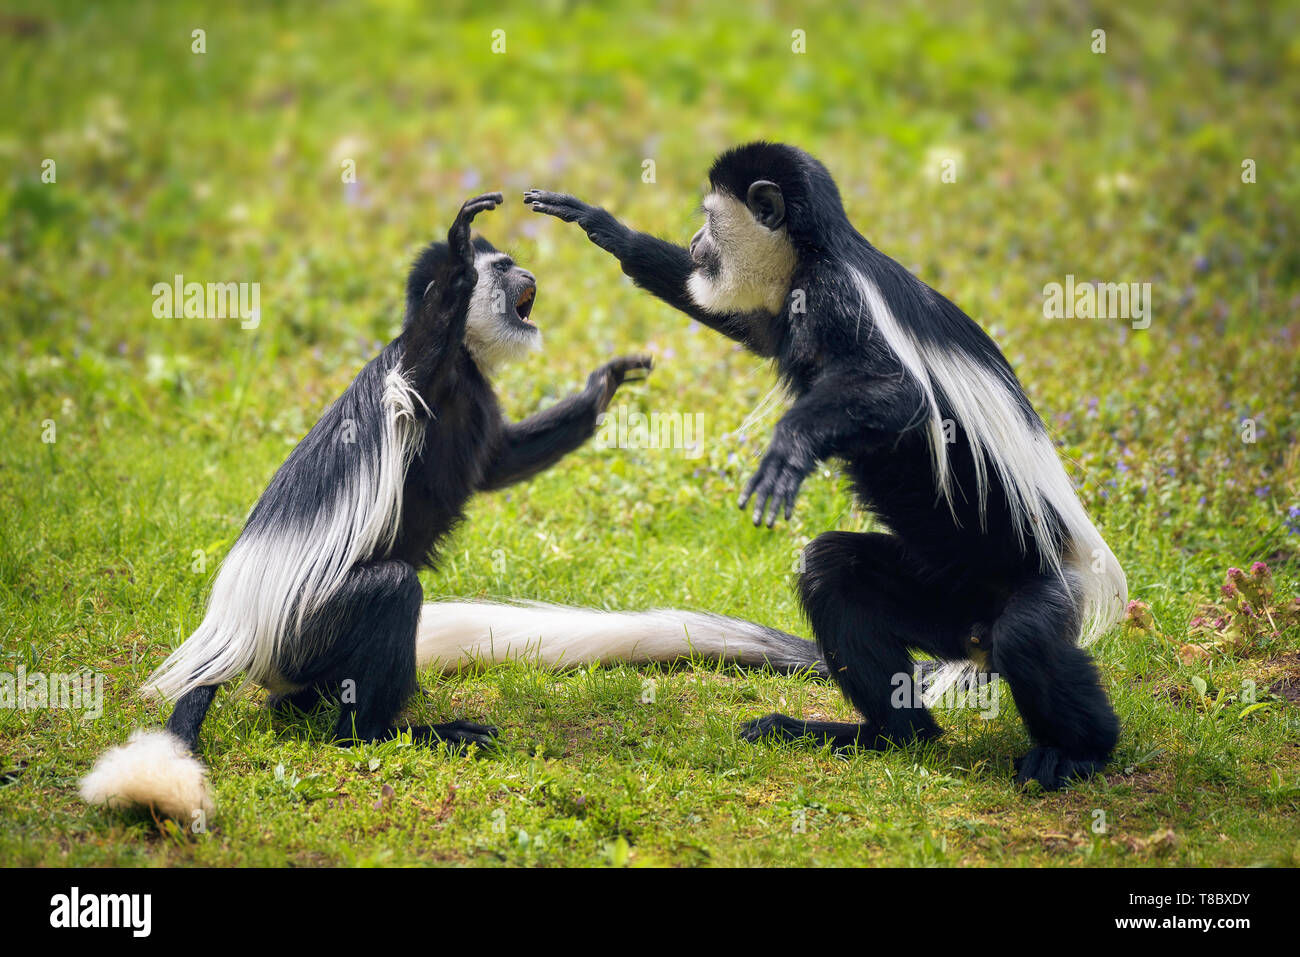 Two Mantled guereza monkeys fighting in grass Stock Photo